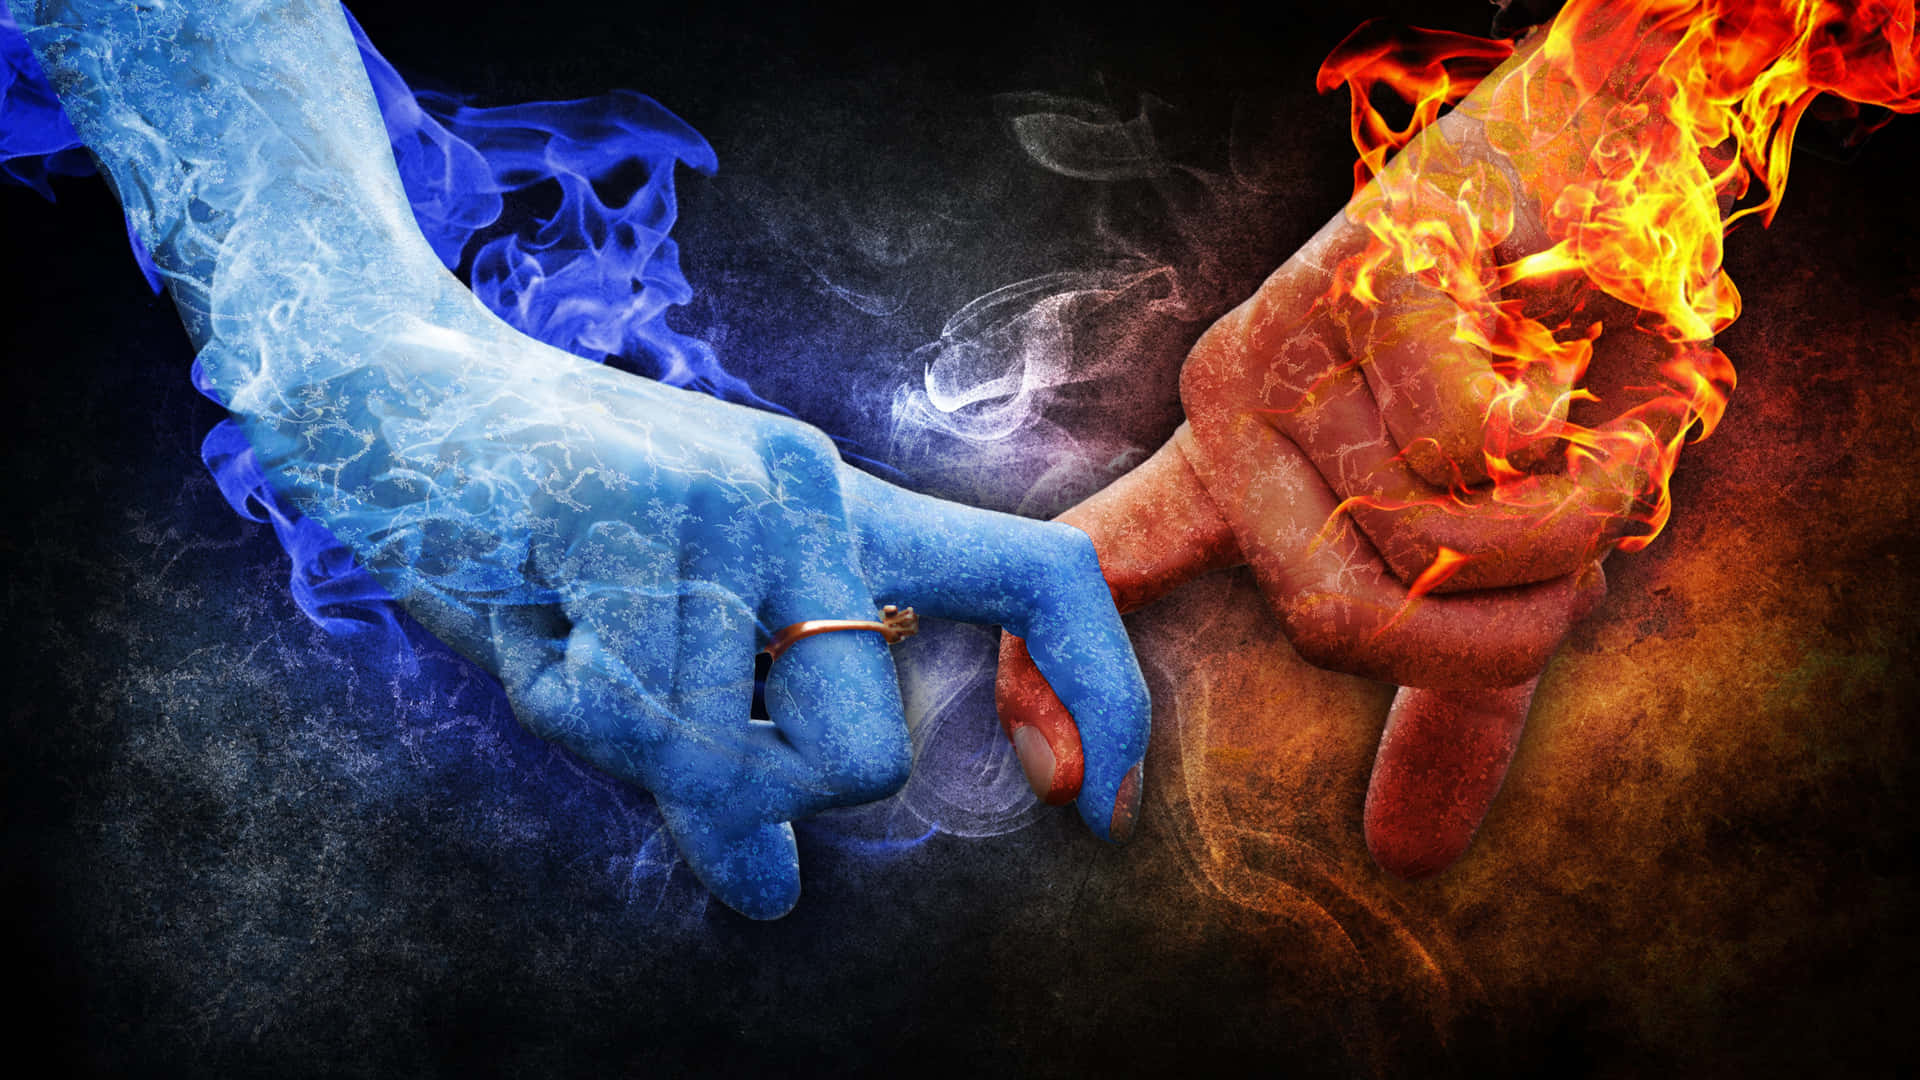 Cool Holding Hands With Blue And Red Flame Picture